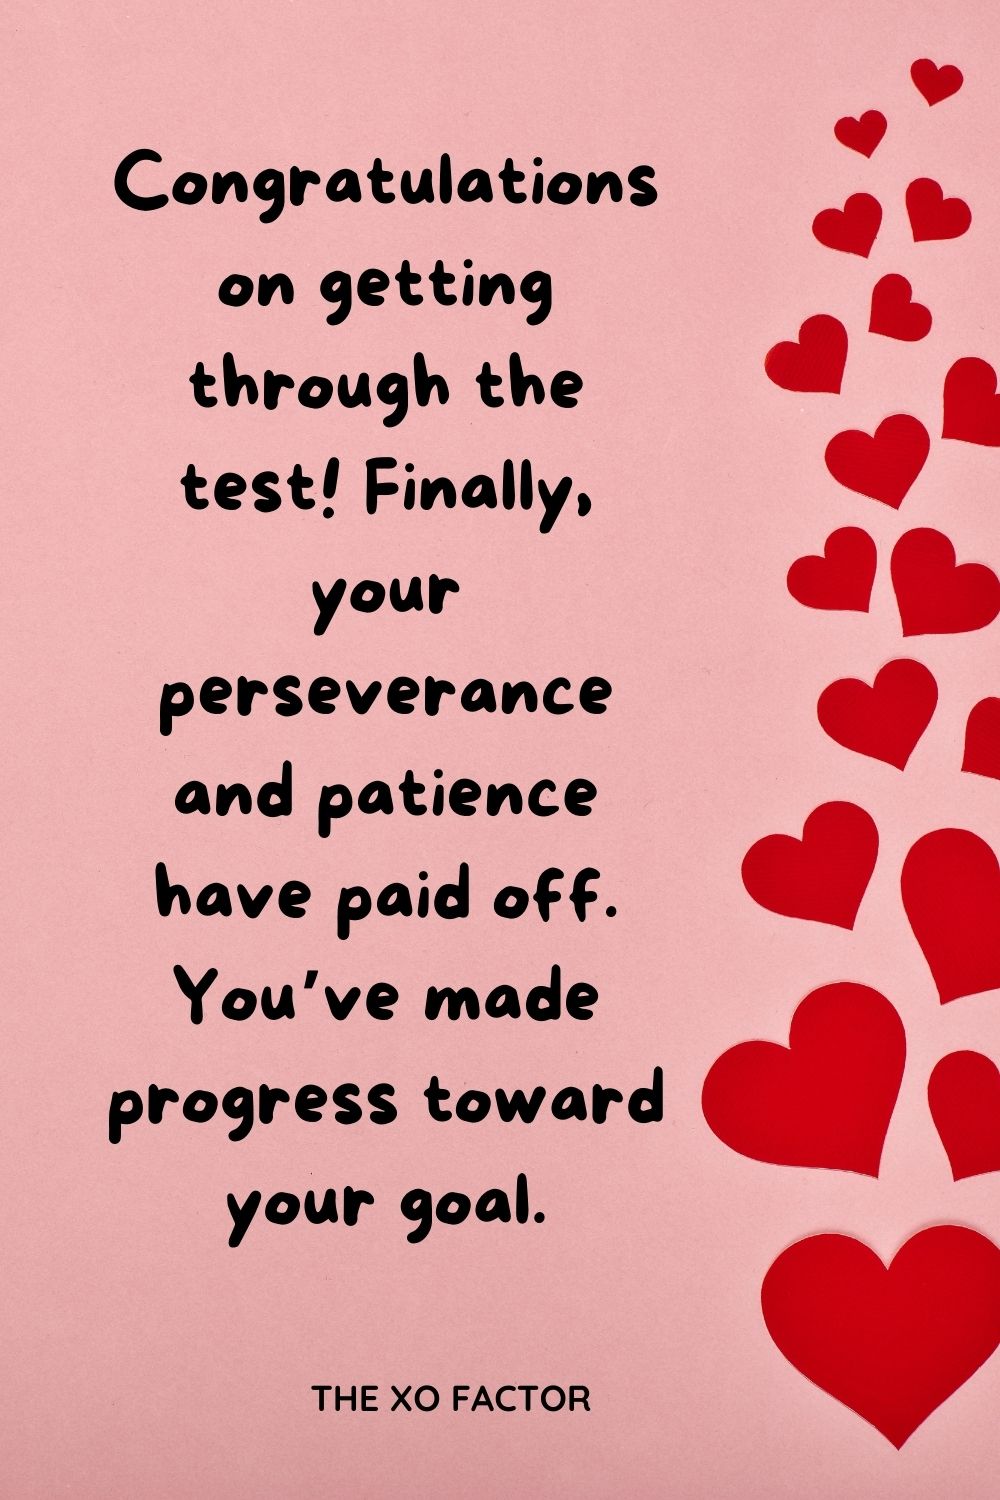 Congratulations on getting through the test! Finally, your perseverance and patience have paid off. You’ve made progress toward your goal.